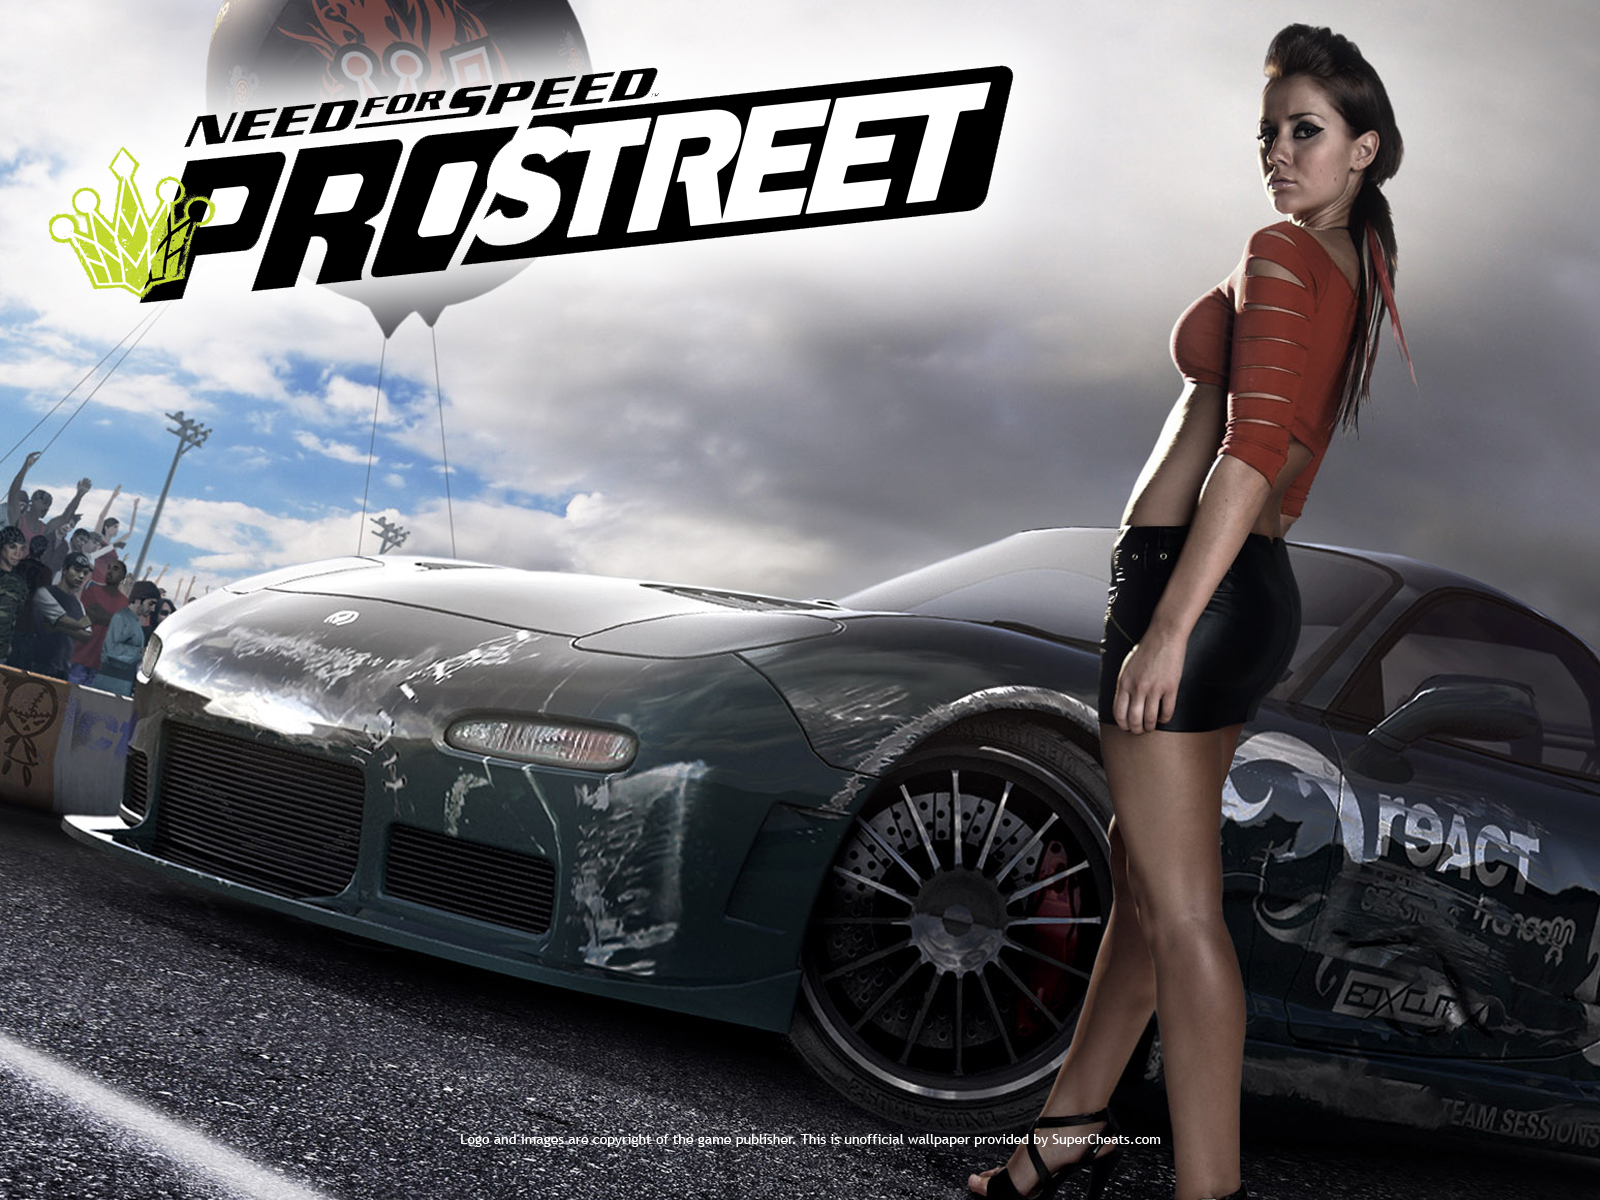 1600px x 1200px - Need for speed porno art adult pic